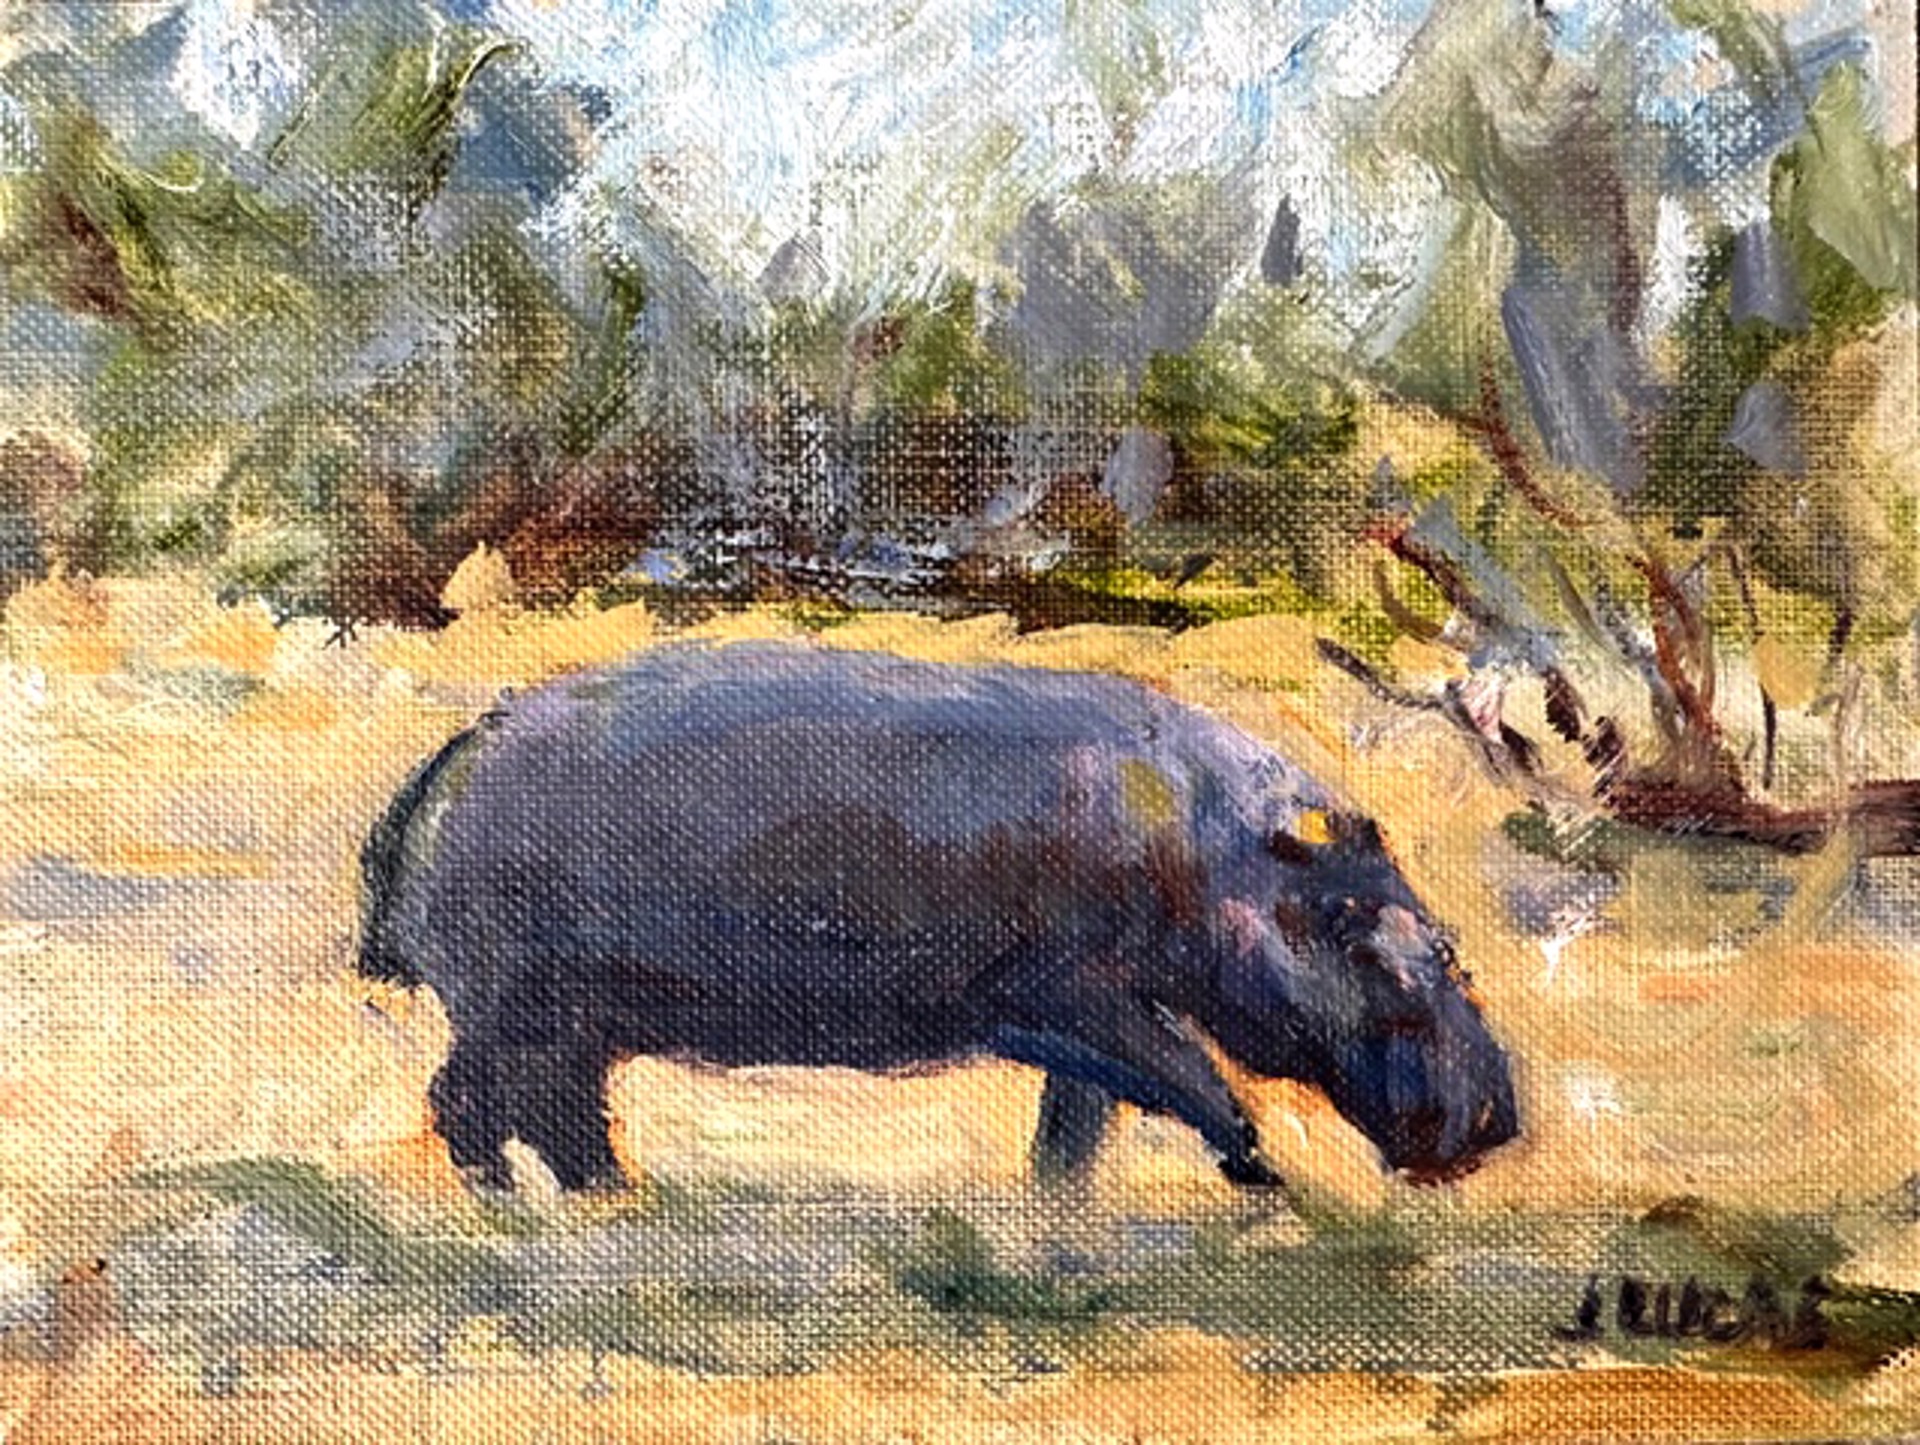 Hippo by Janet Lucas Beck